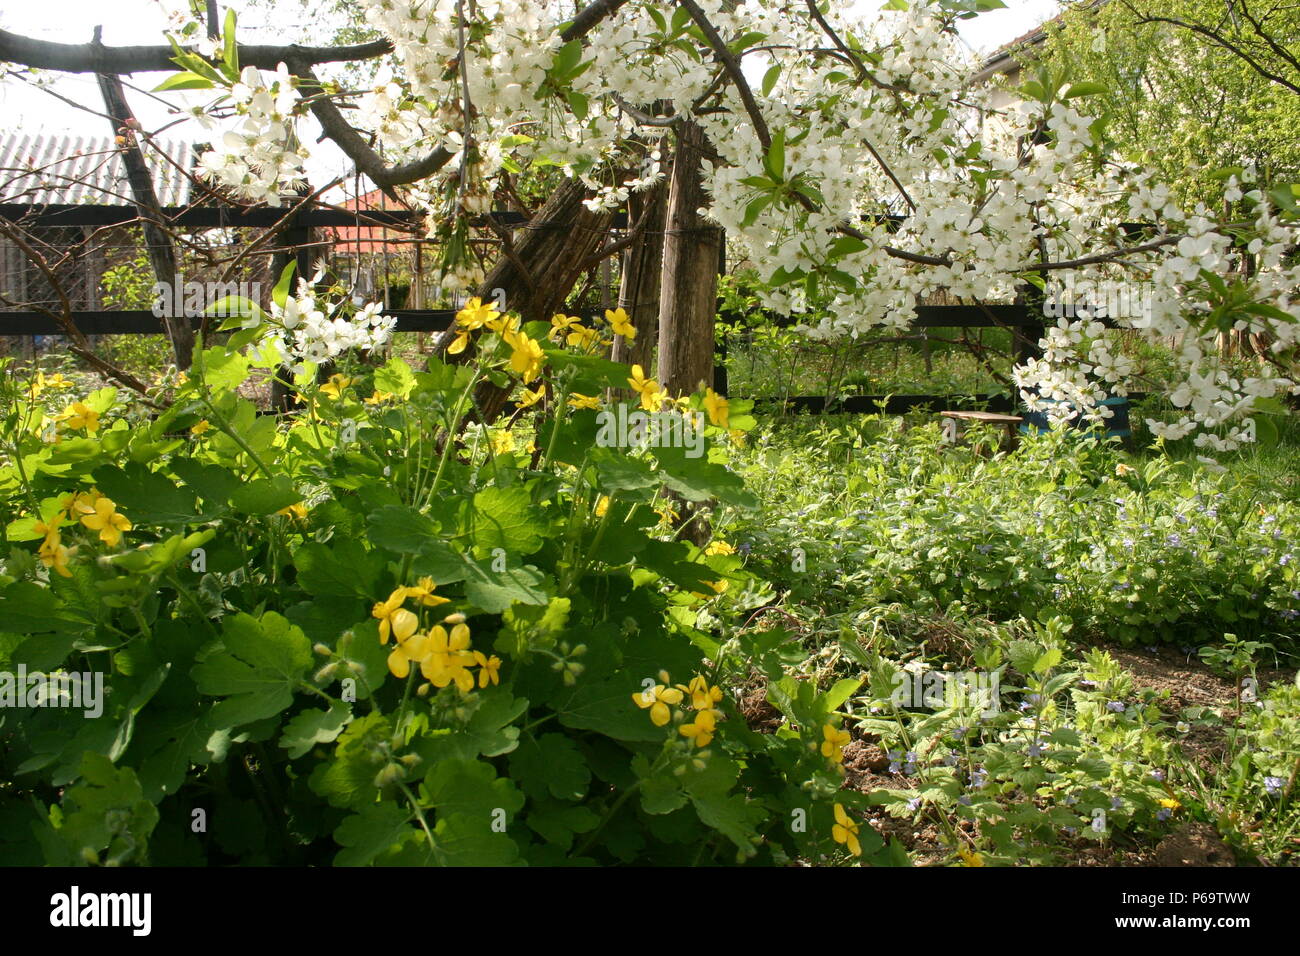 Garden in spring, with Chelidonium majus (Greater Celandine) and tree blossom Stock Photo